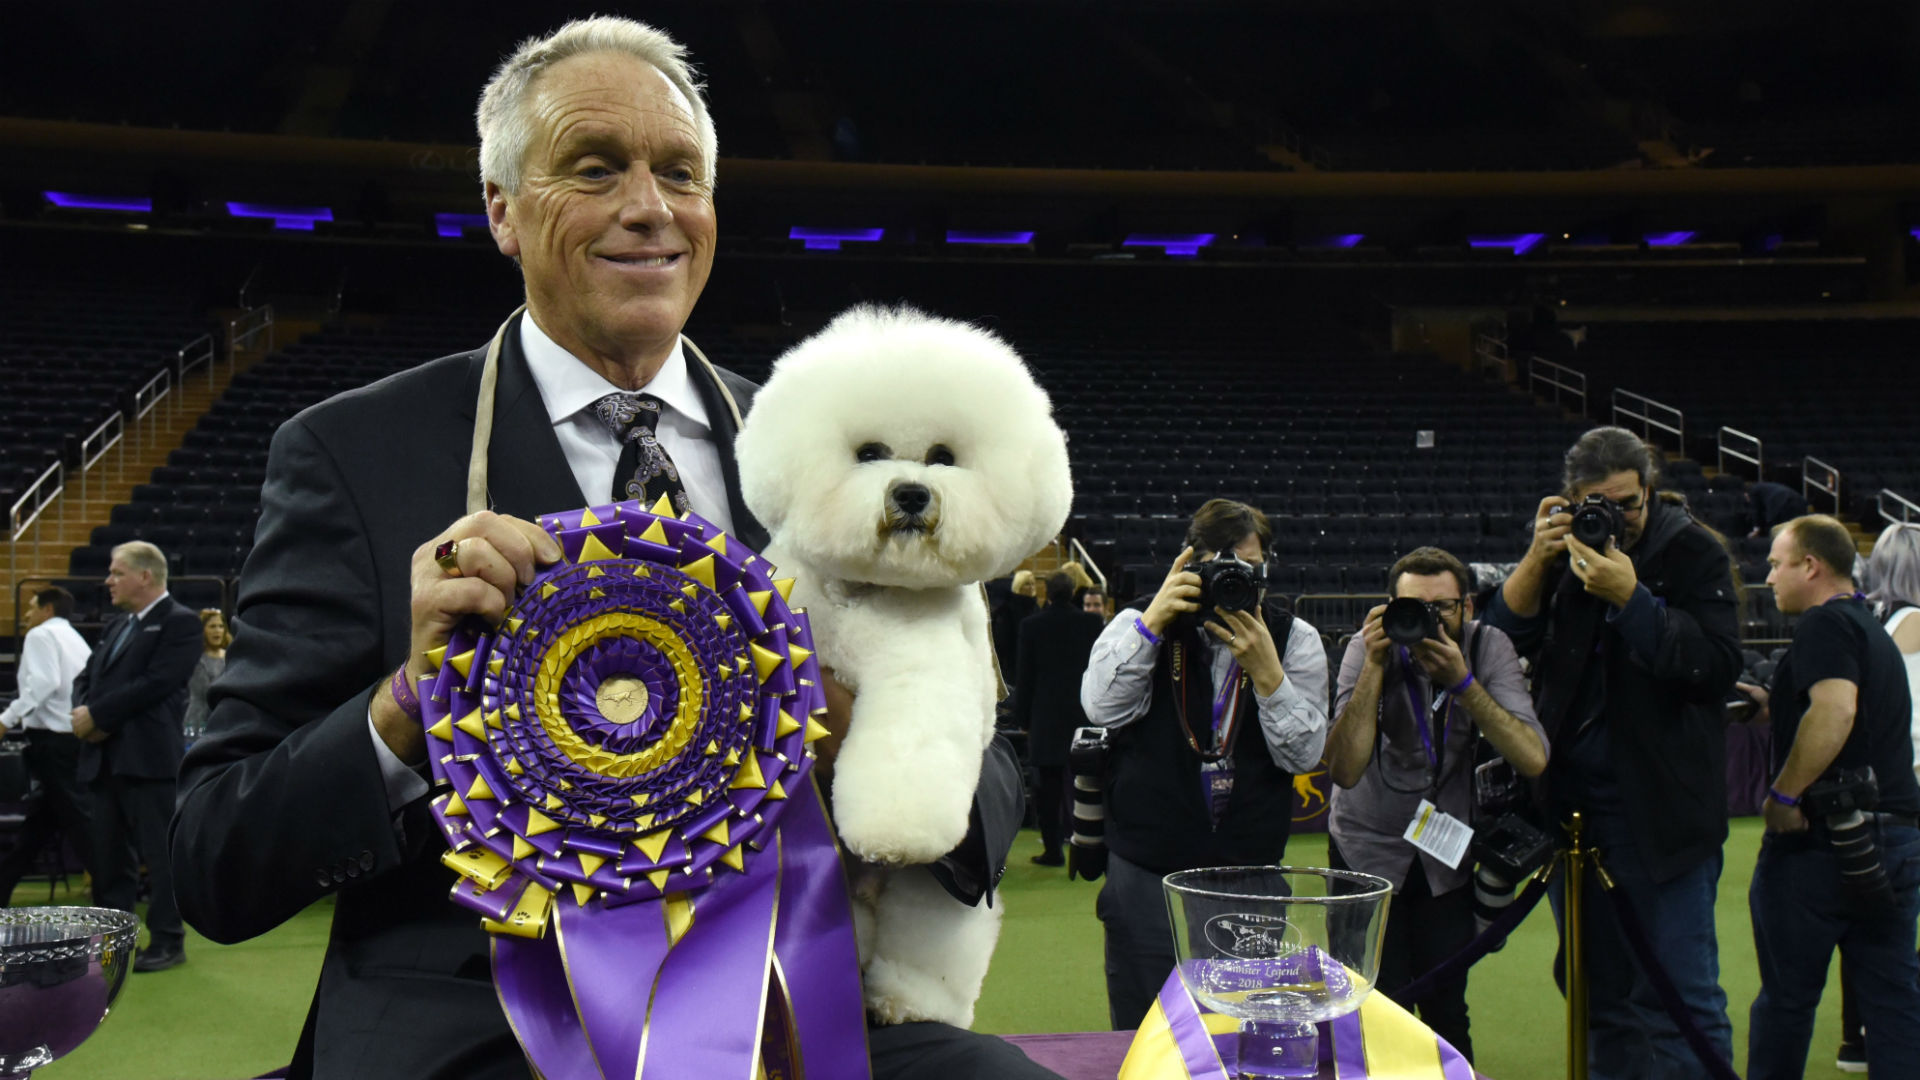 Westminster Dog Show 2019: Dates, TV schedule, live stream, list of